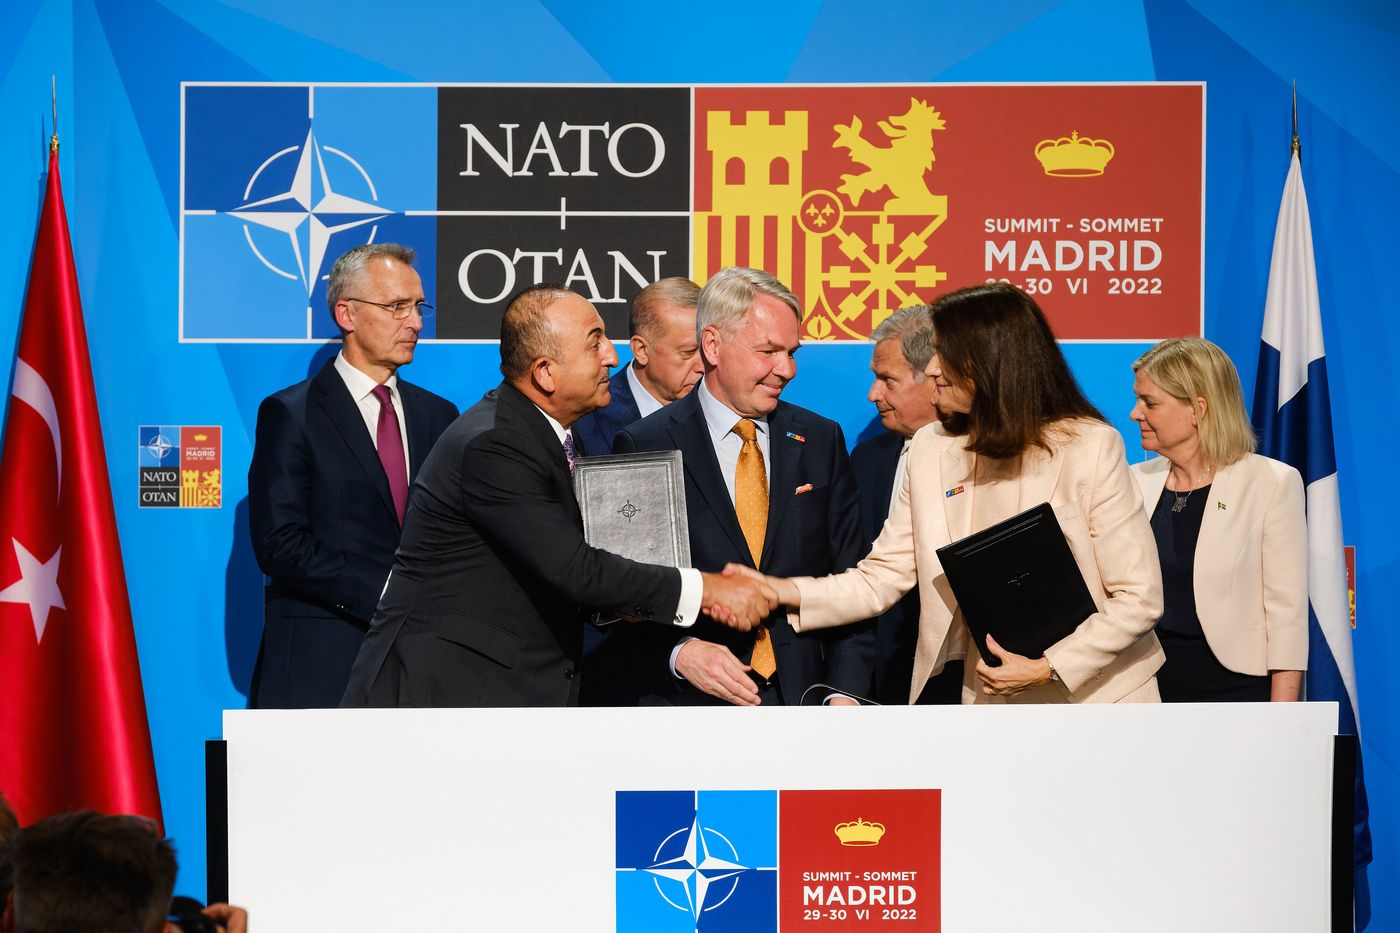 Mevlüt Çavuşoğlu, Minister of Foreign Affairs of Turkey, shakes hands with Ann Linde, Minister of Foreign Affairs of Sweden, during a signing ceremony paving the way for Finnish and Swedish NATO membership. 